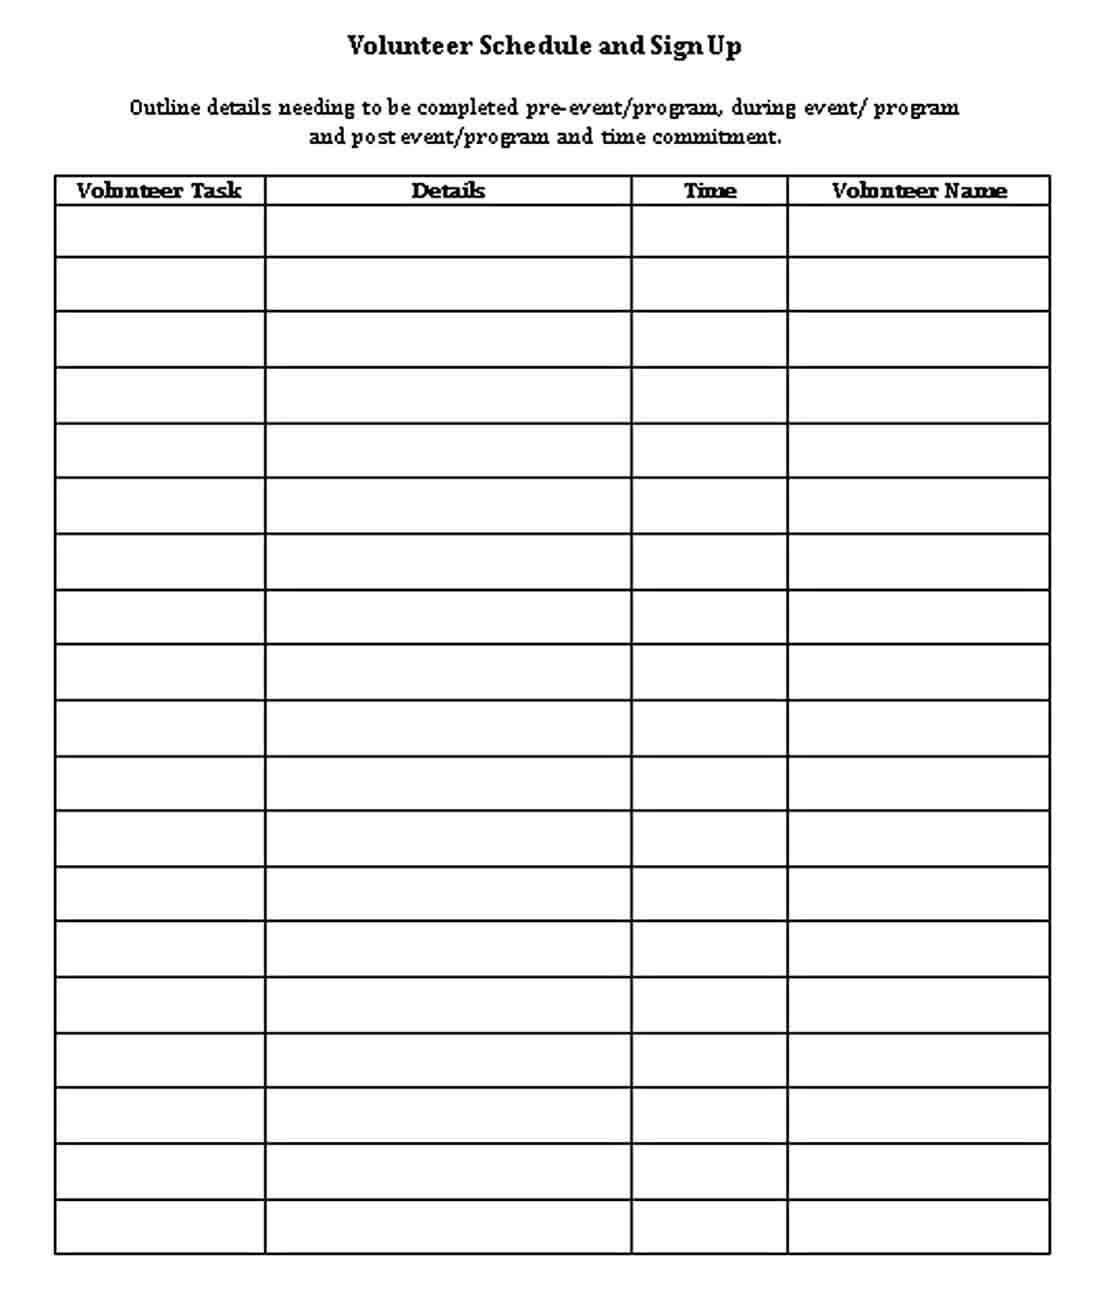 Volunteer Schedule and Sign Up Template in Word Doc